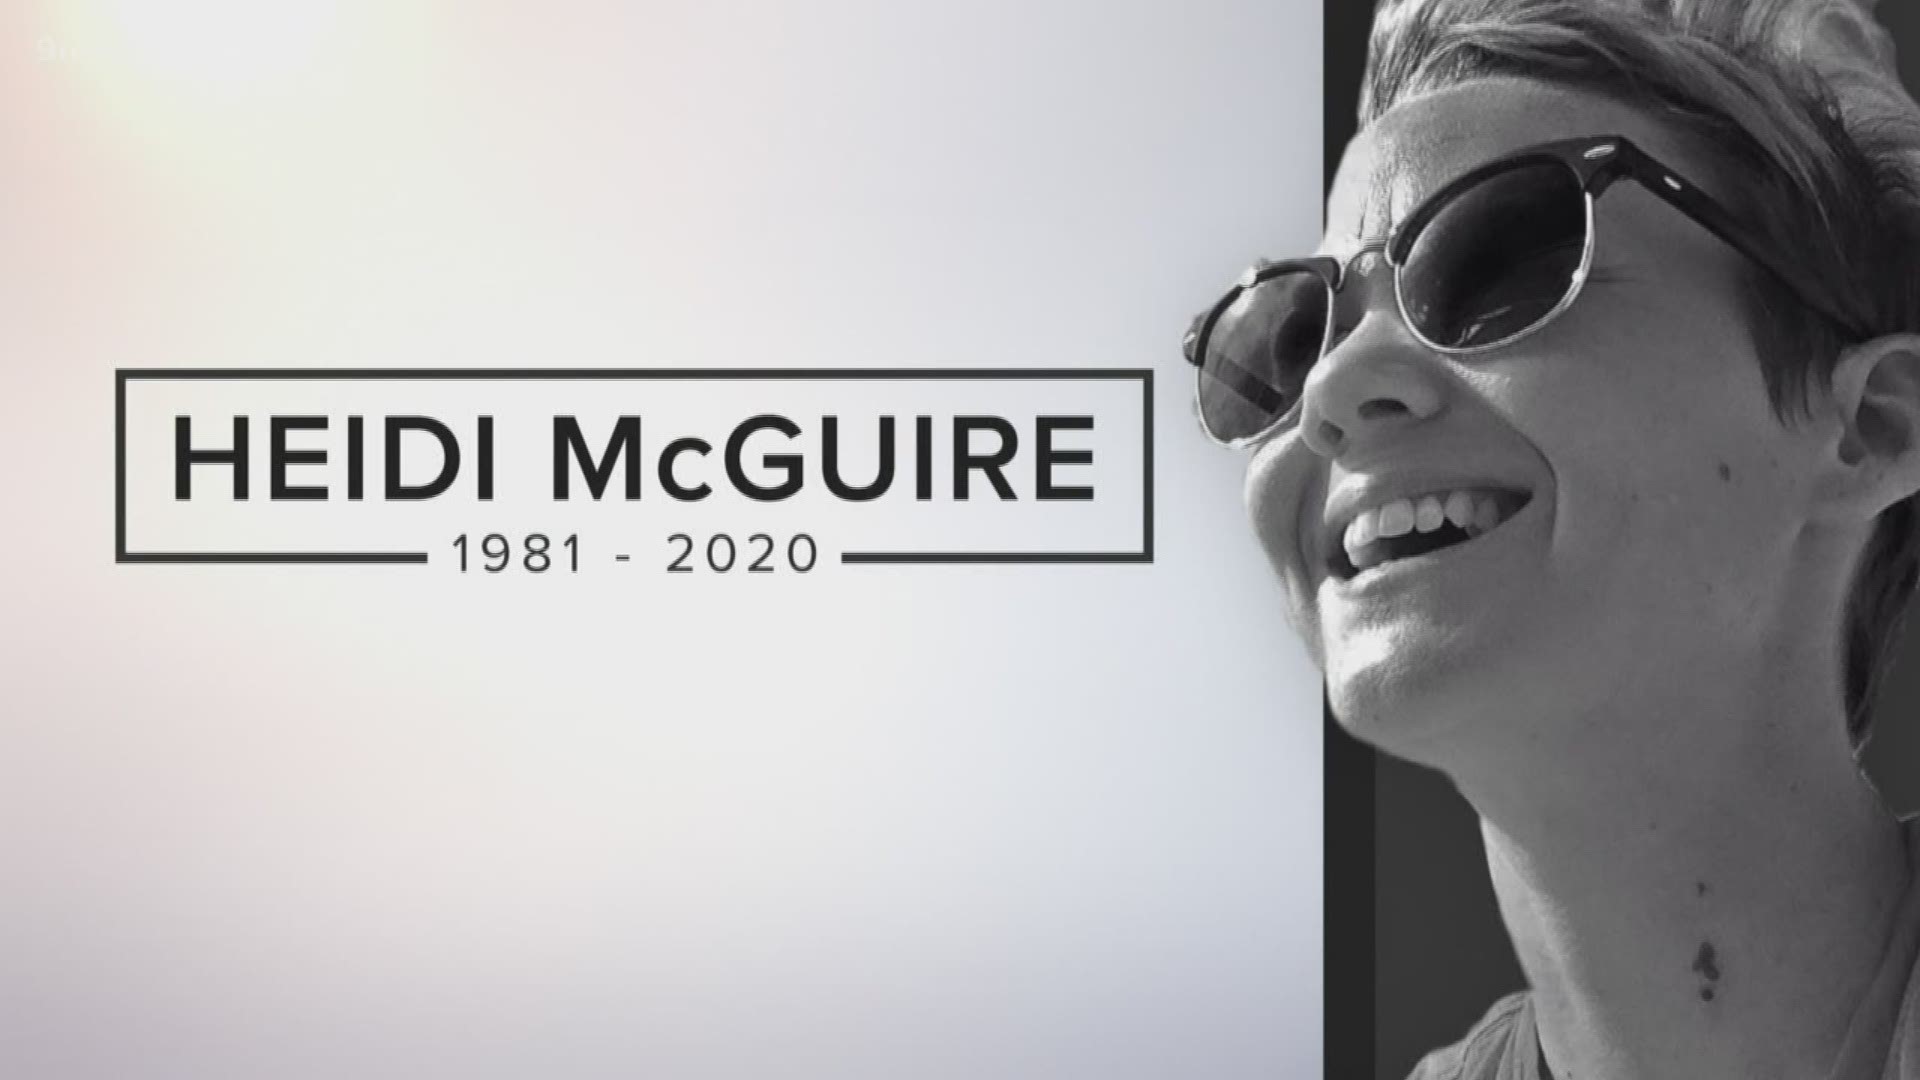 Heidi McGuire brought light, laughter and happiness into every room she entered. This weekend she passed away after a battle with cancer.